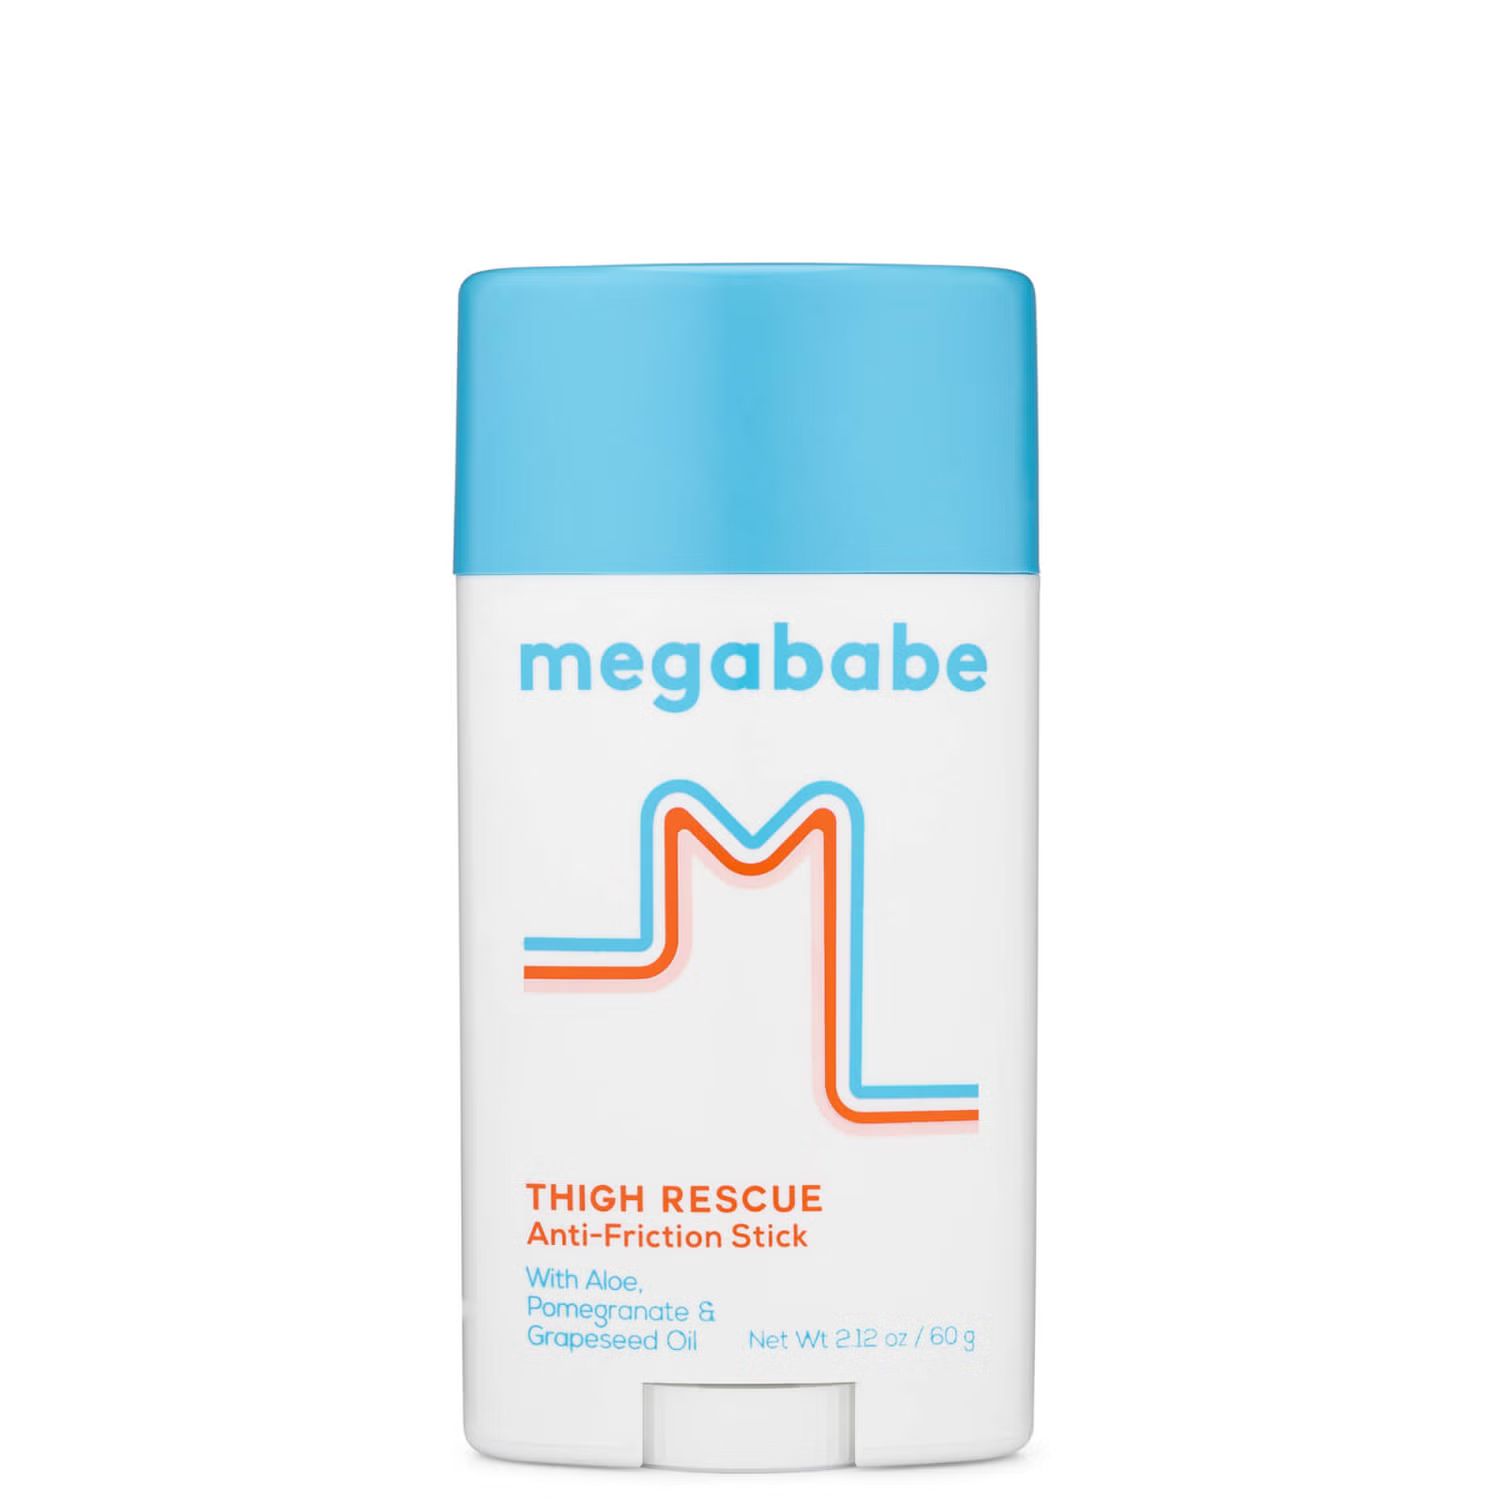 Megababe Thigh Rescue (Various Sizes) | Cult Beauty